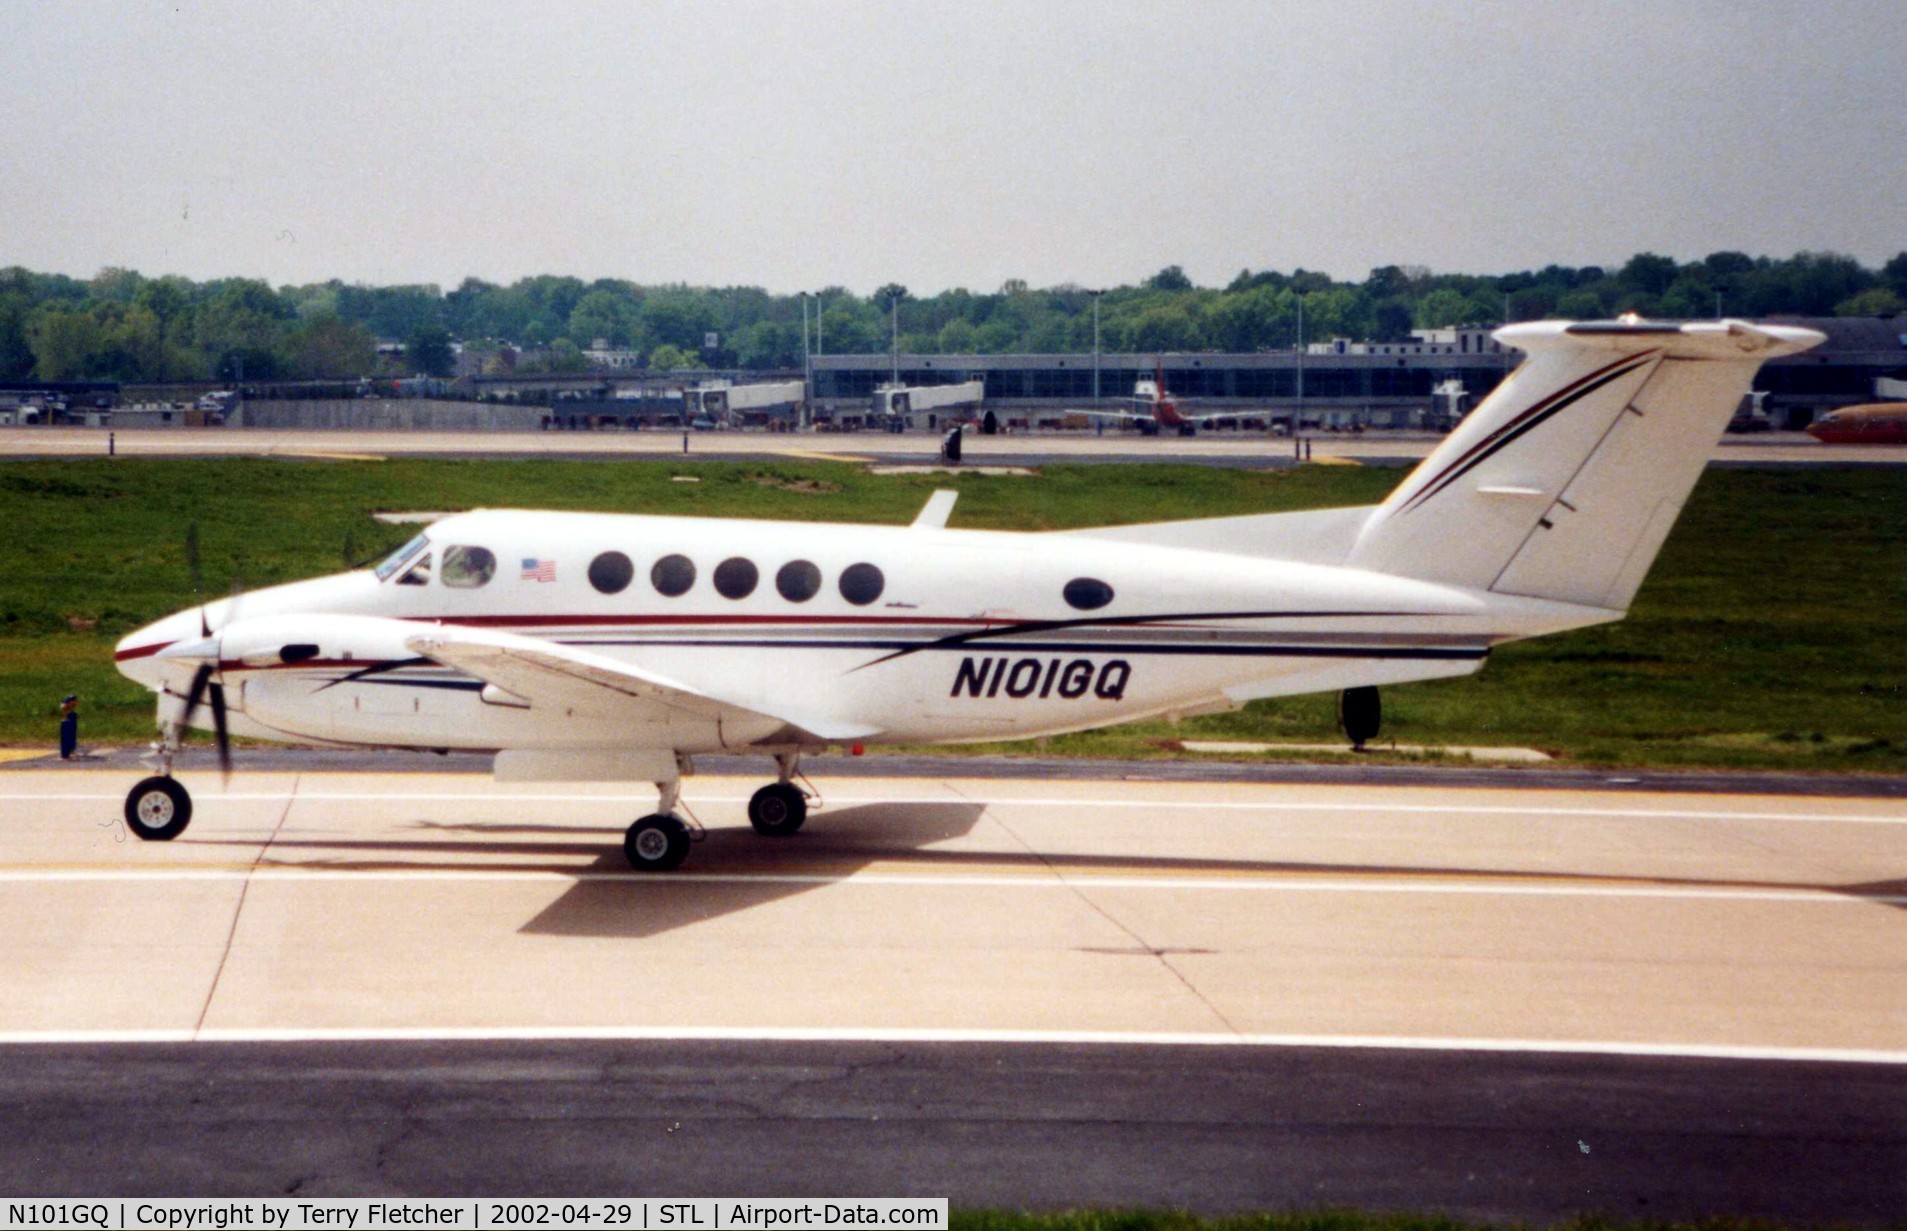 N101GQ, 1978 Beech 200 C/N BB-427, This Beech 200 was subsequently sold in Venezuala